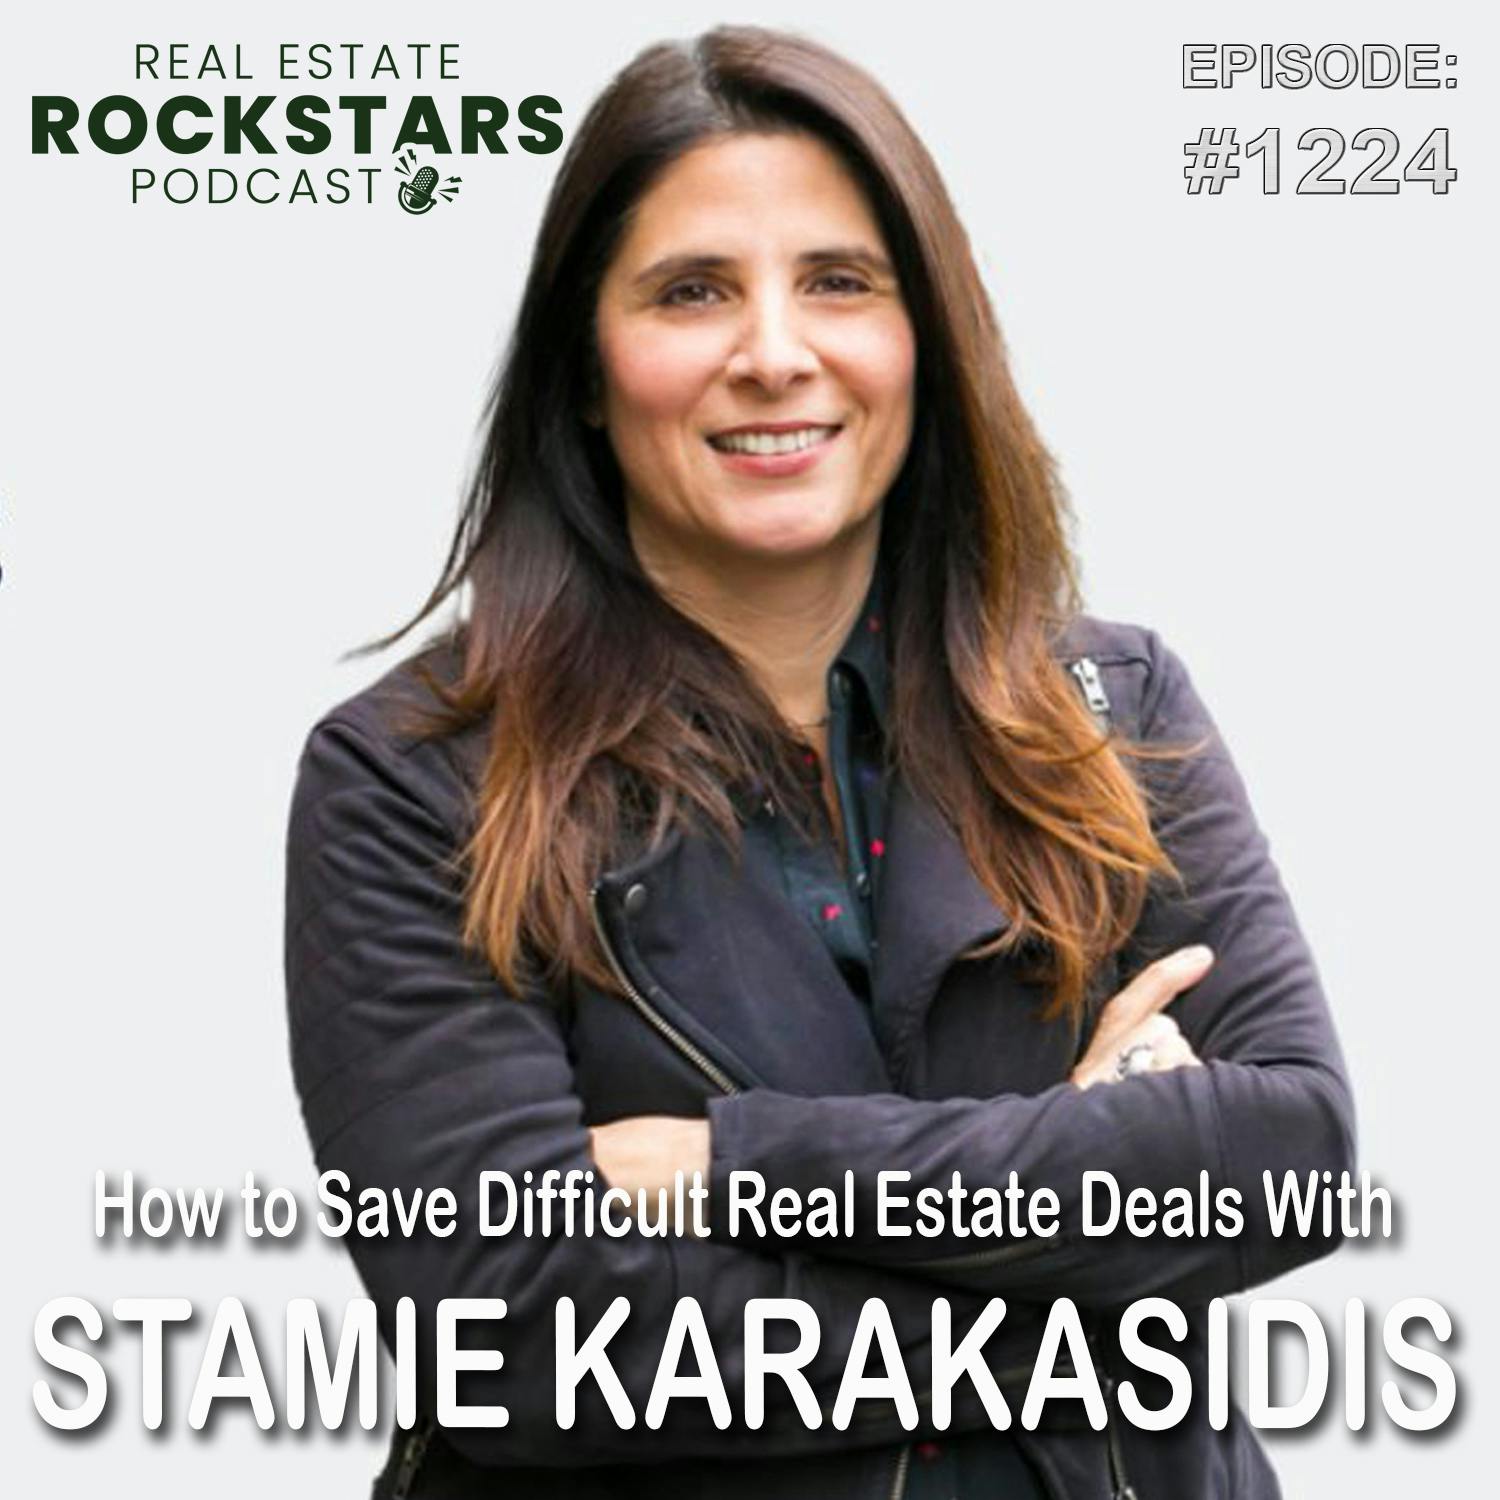 1224: How to Save Difficult Real Estate Deals With Stamie Karakasidis